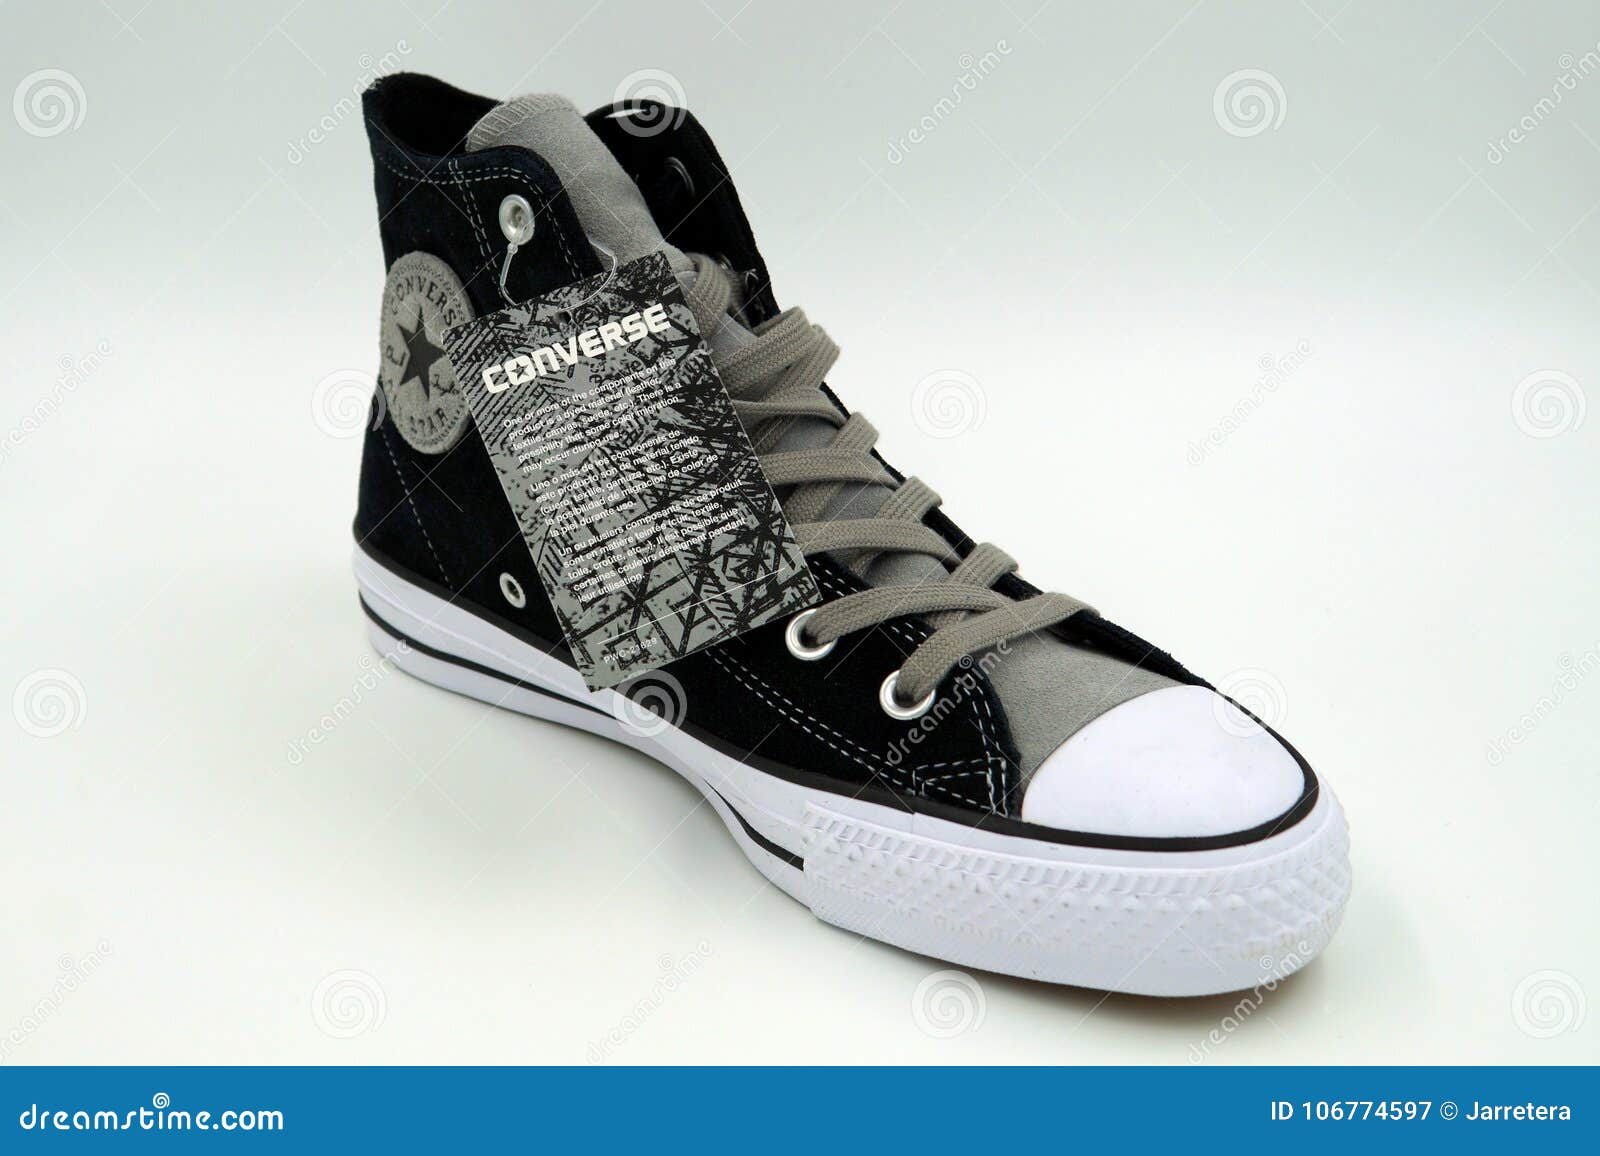 Converse All Stars Sneaker Editorial Photography Image of clothing, 106774597